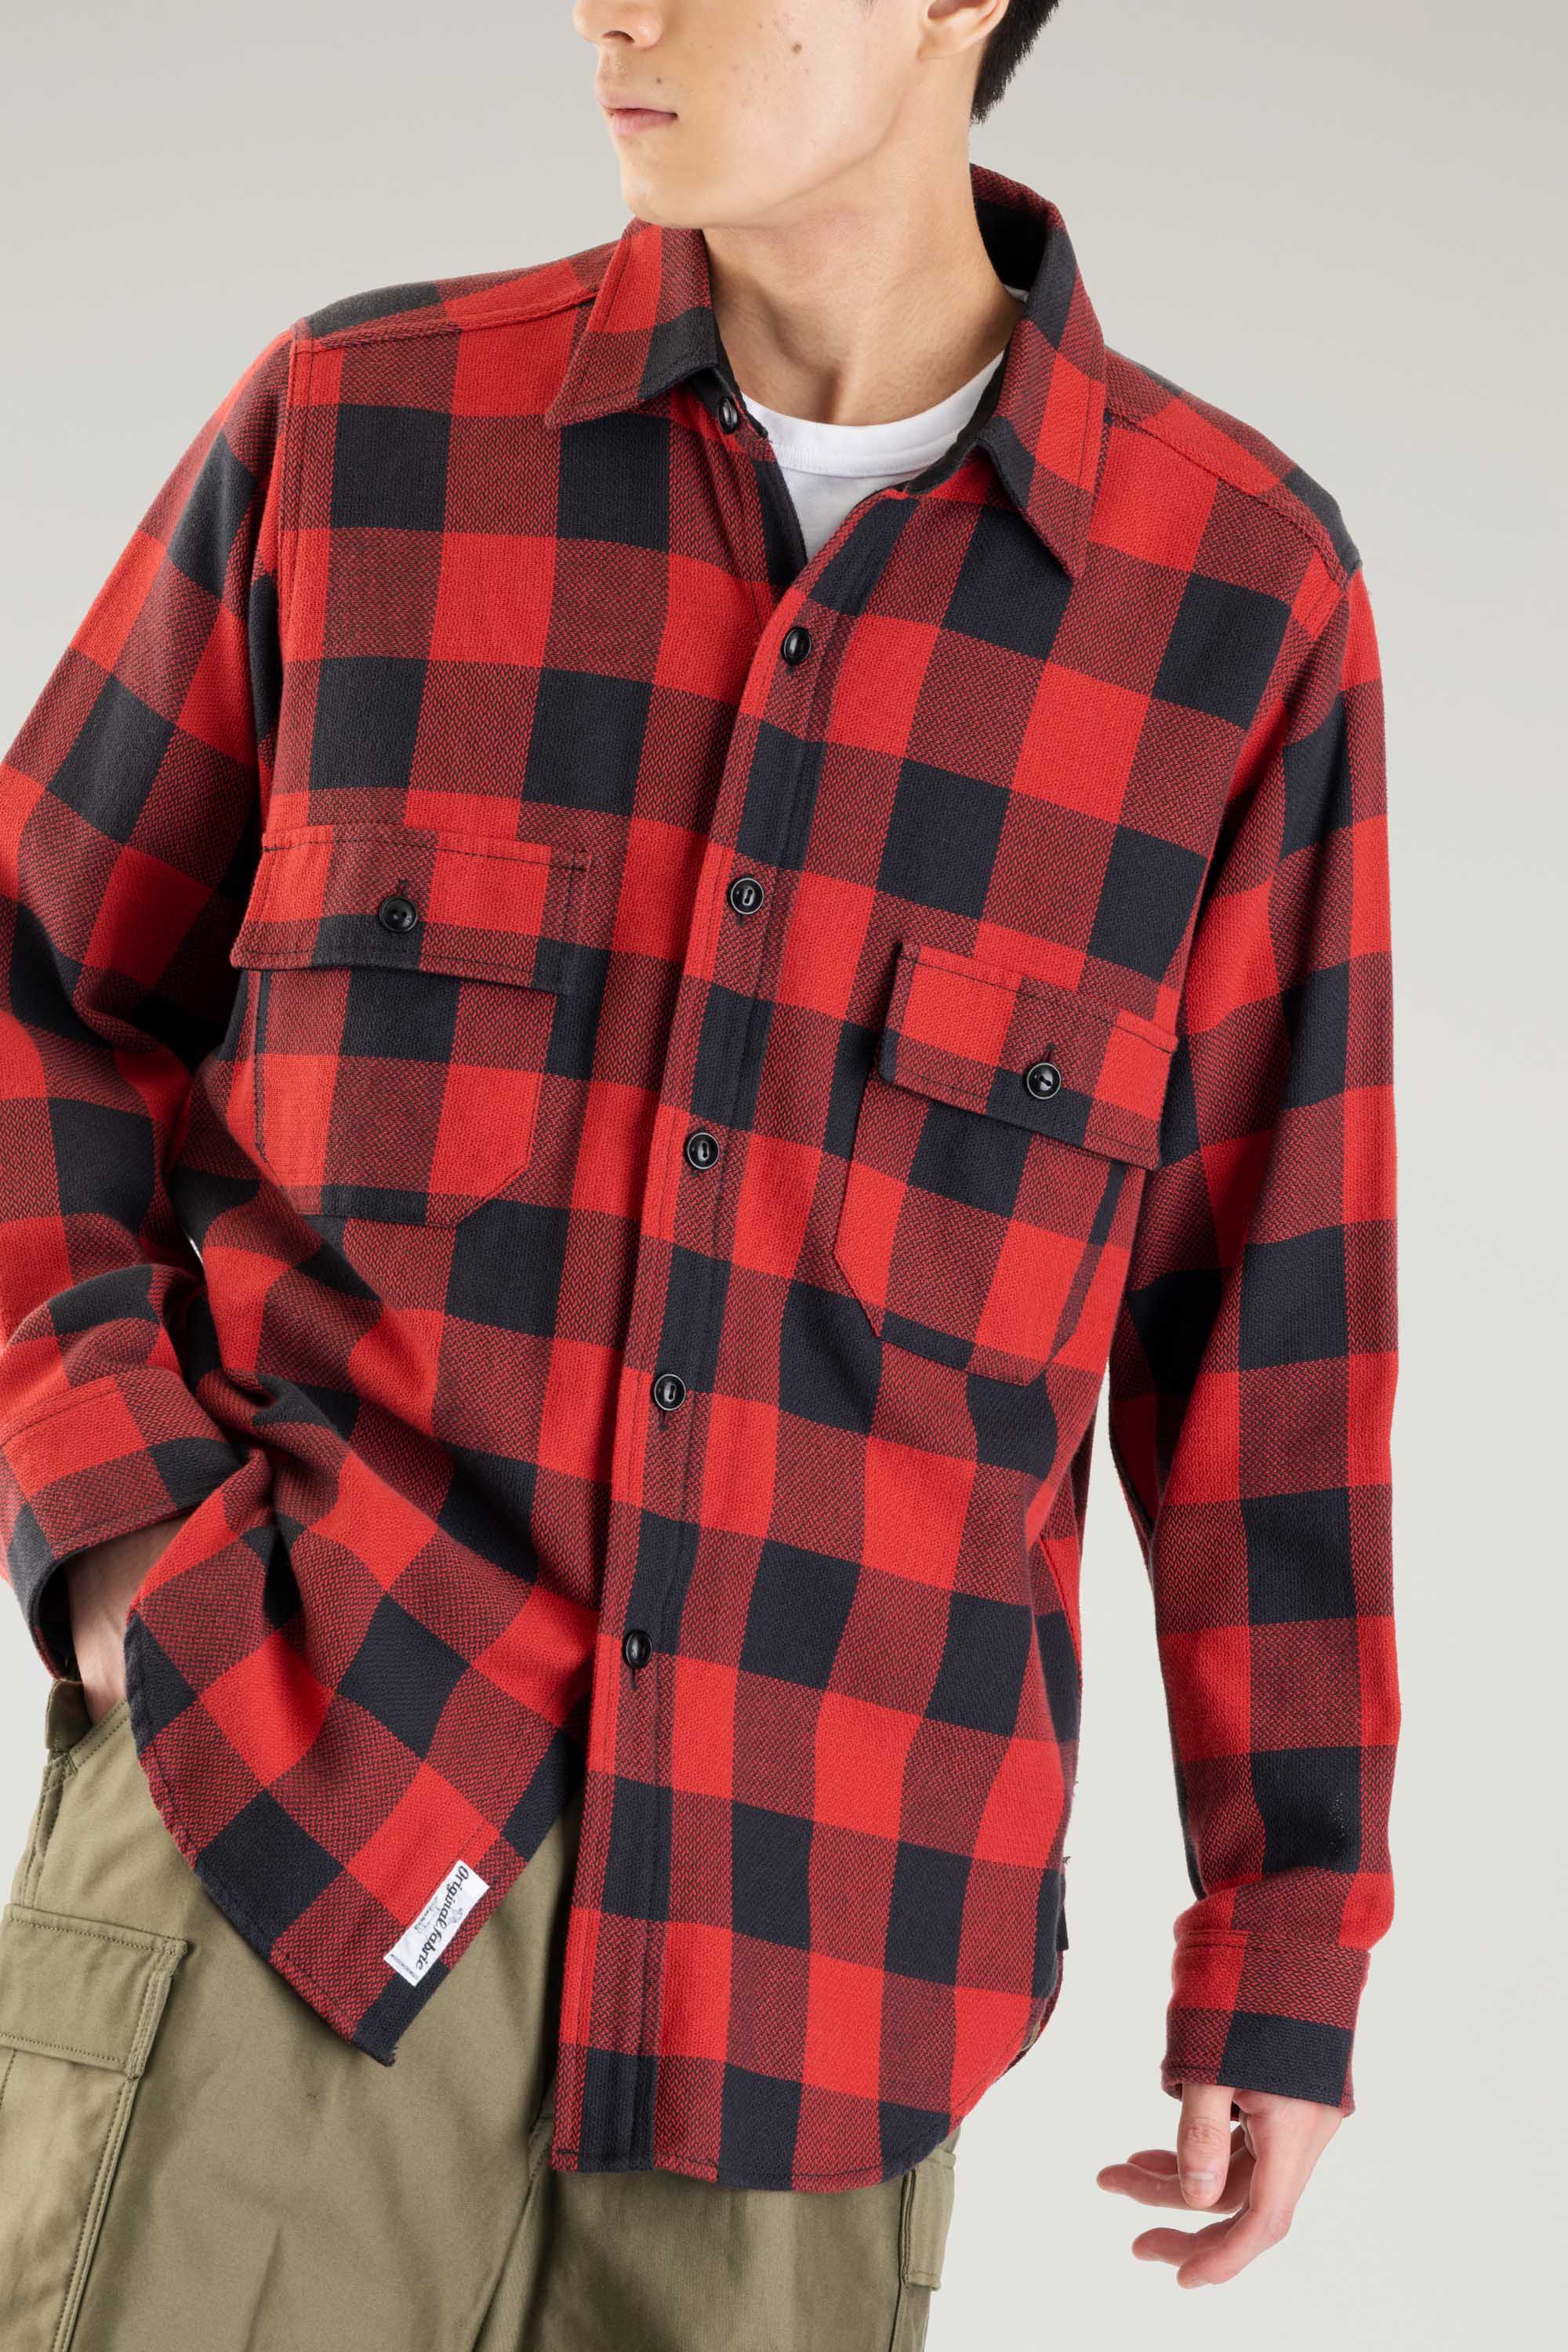 WOOLRICH ウール リッチ シャツ トップス メンズ TRADITIONAL FLANNEL